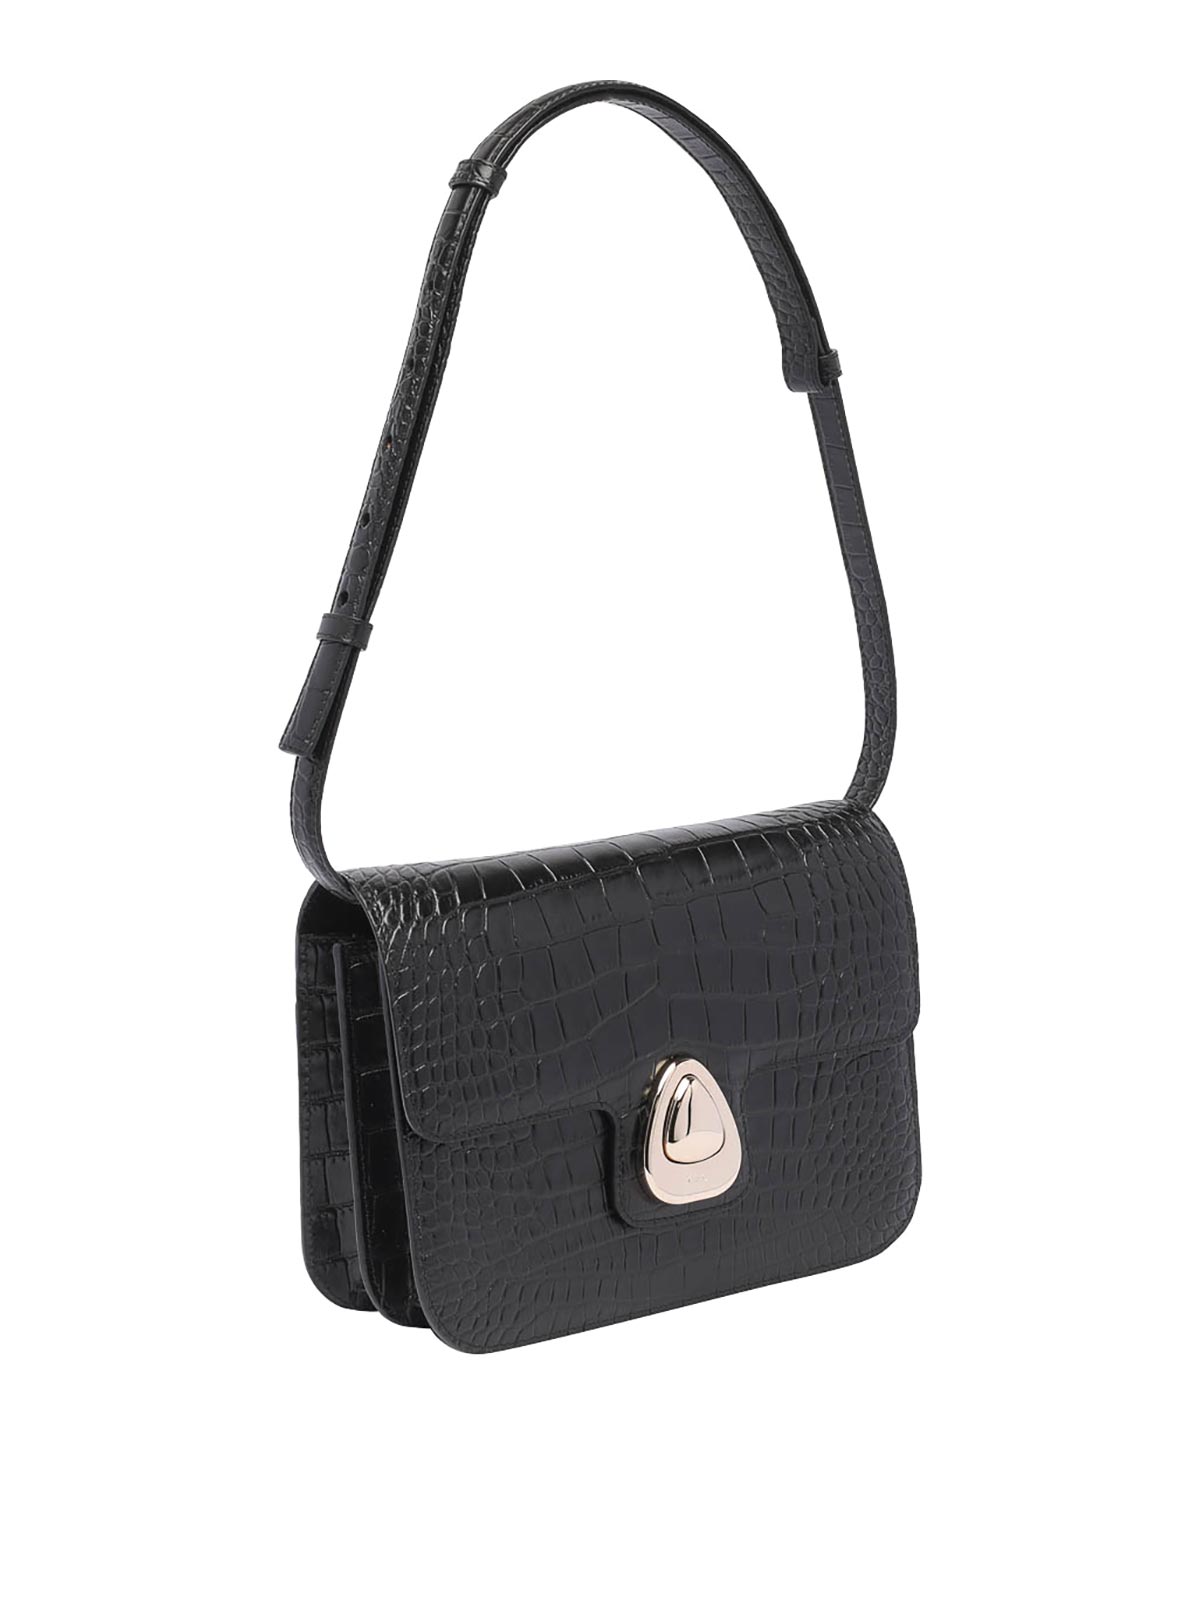 A.P.C. Astra Small Bag in Black